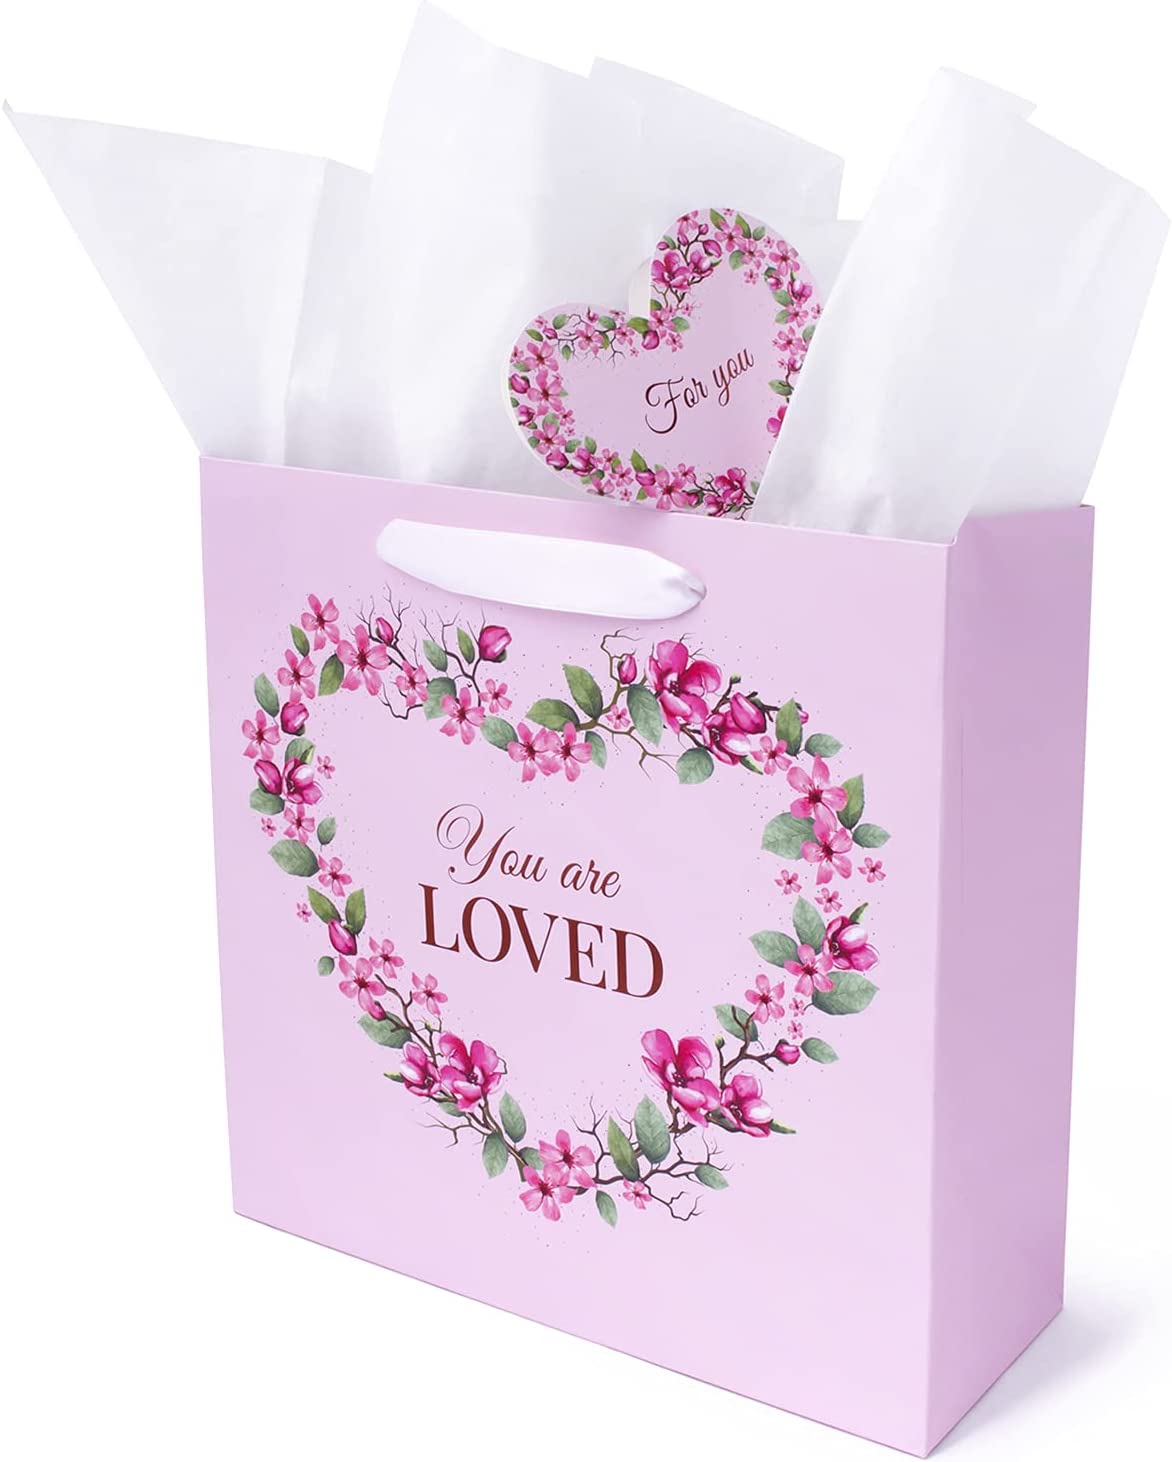 A Thoughtful Treat in an Adorable Mother’s Day Gift Bag!